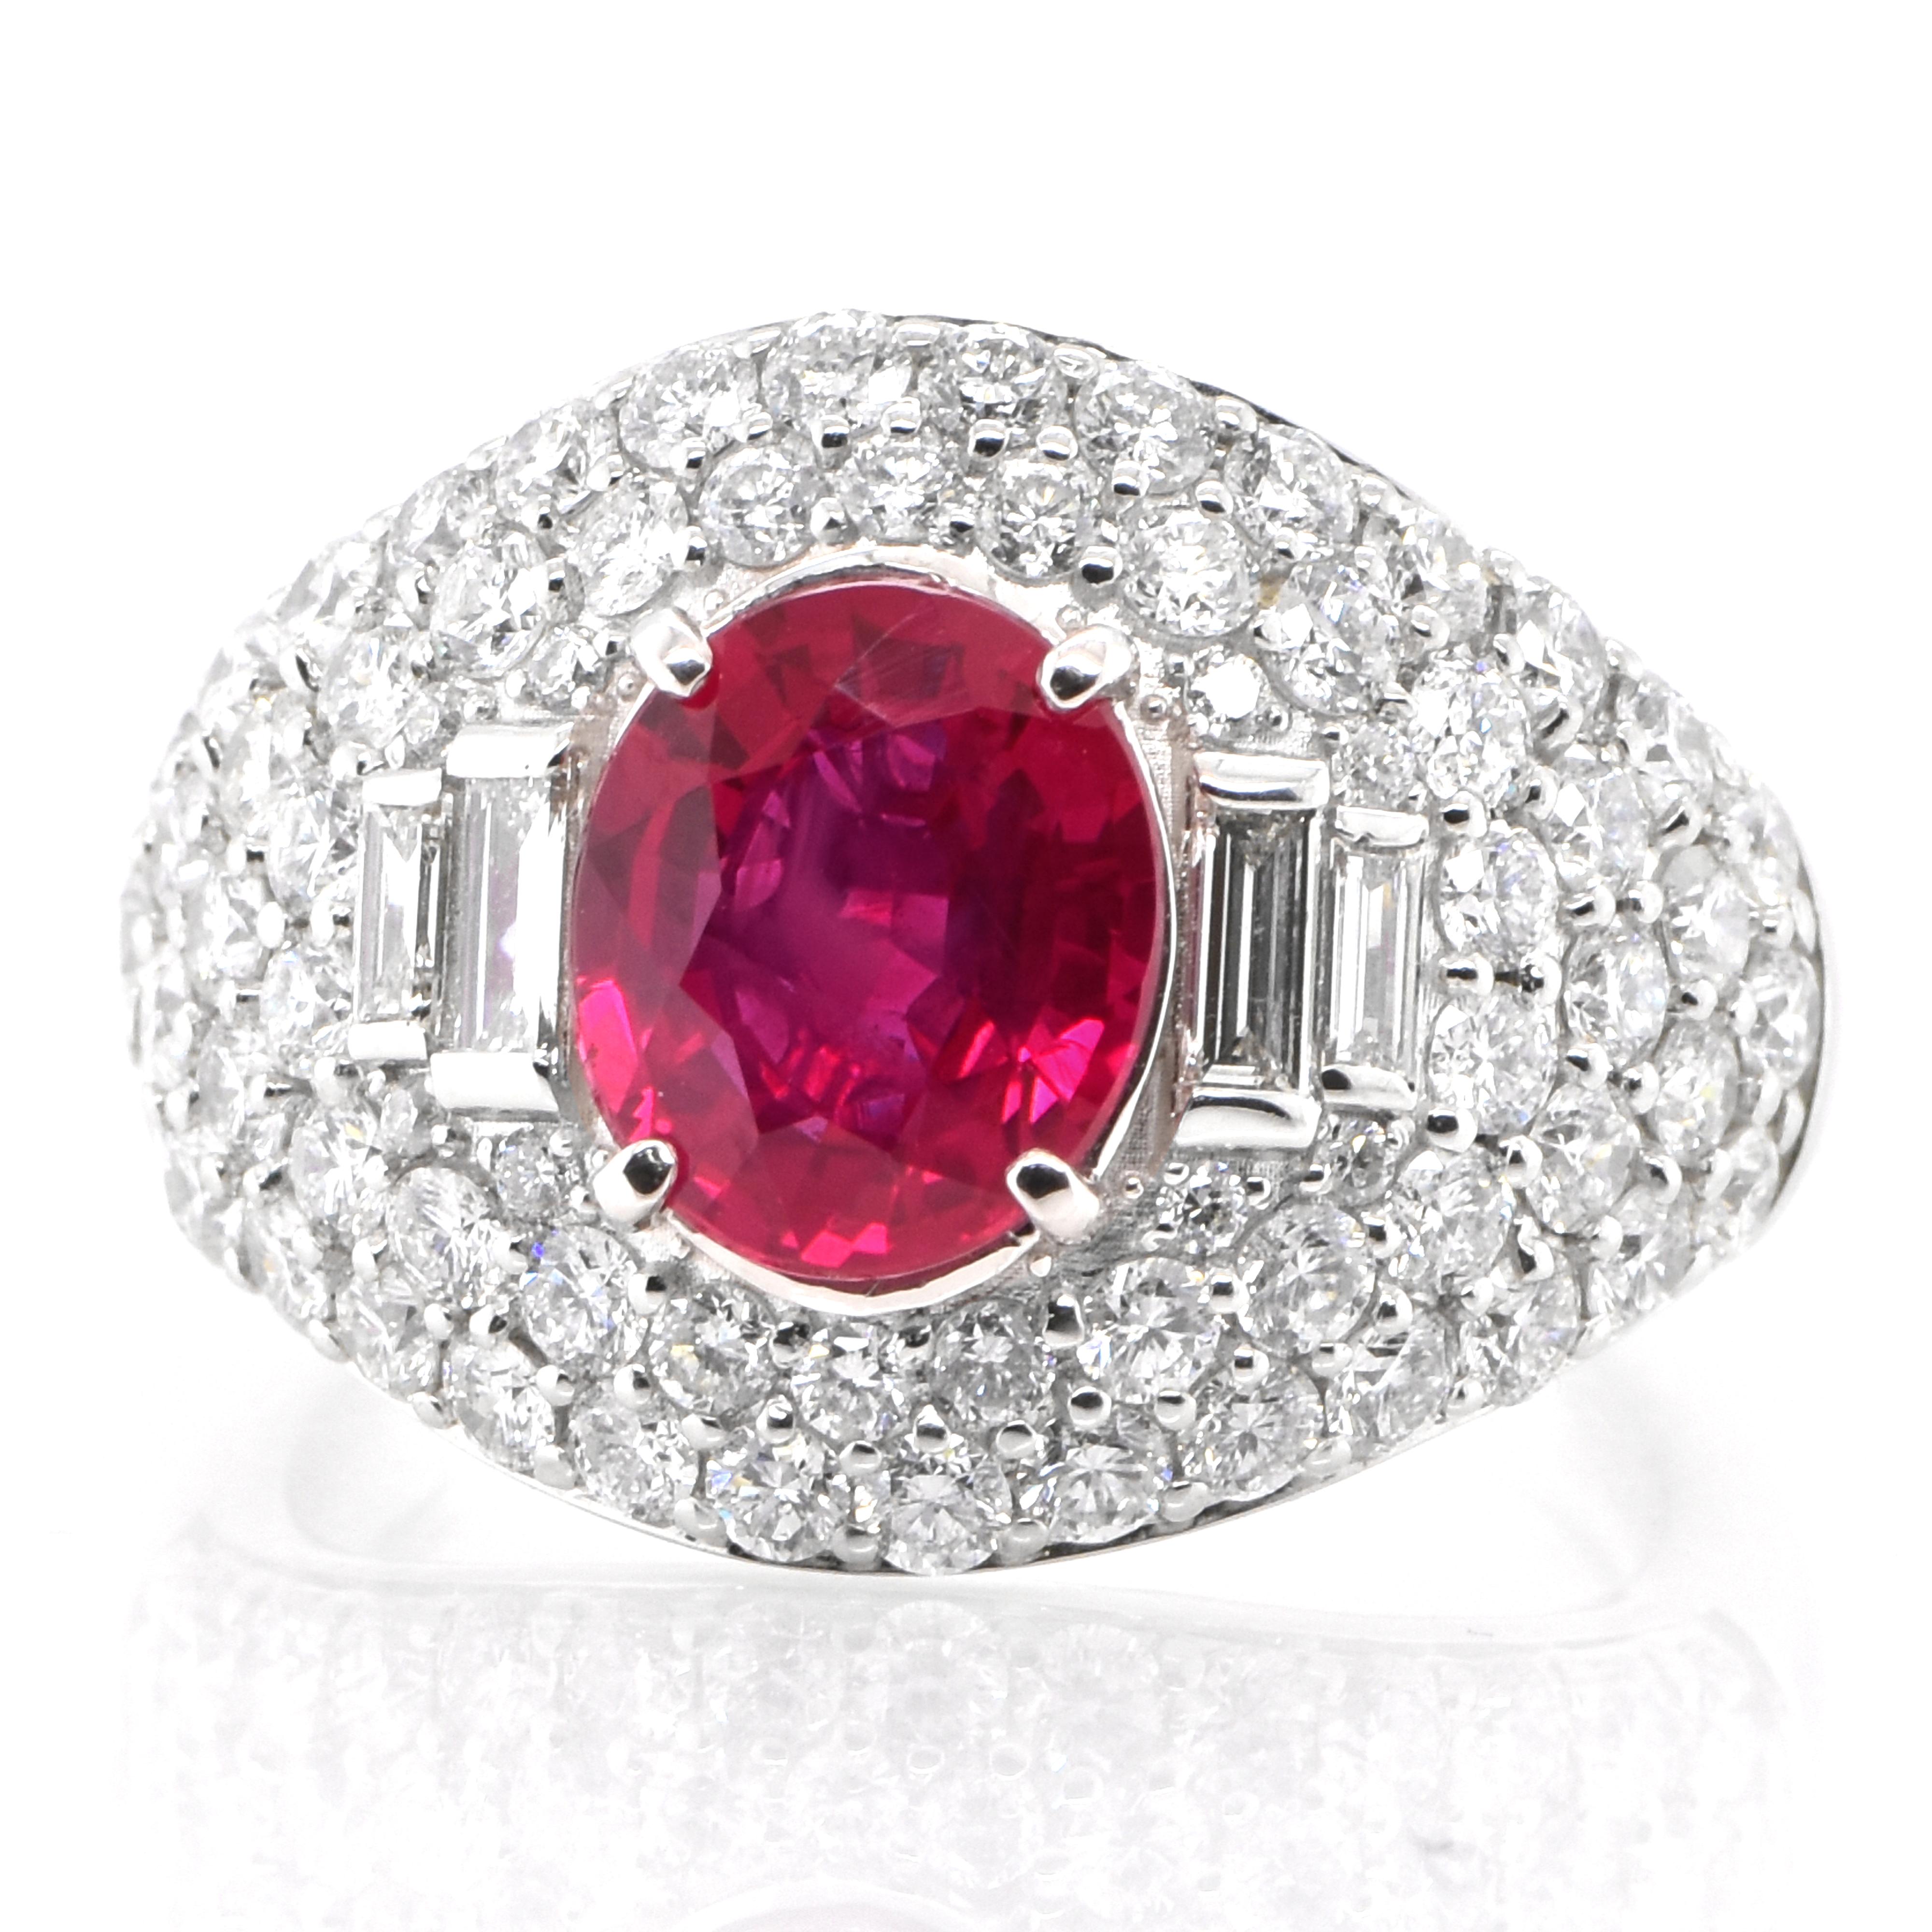 A beautiful ring set in Platinum featuring a GIA Certified 2.15 Carat Natural Burmese Ruby and 1.85 Carat Diamonds. Rubies are referred to as 